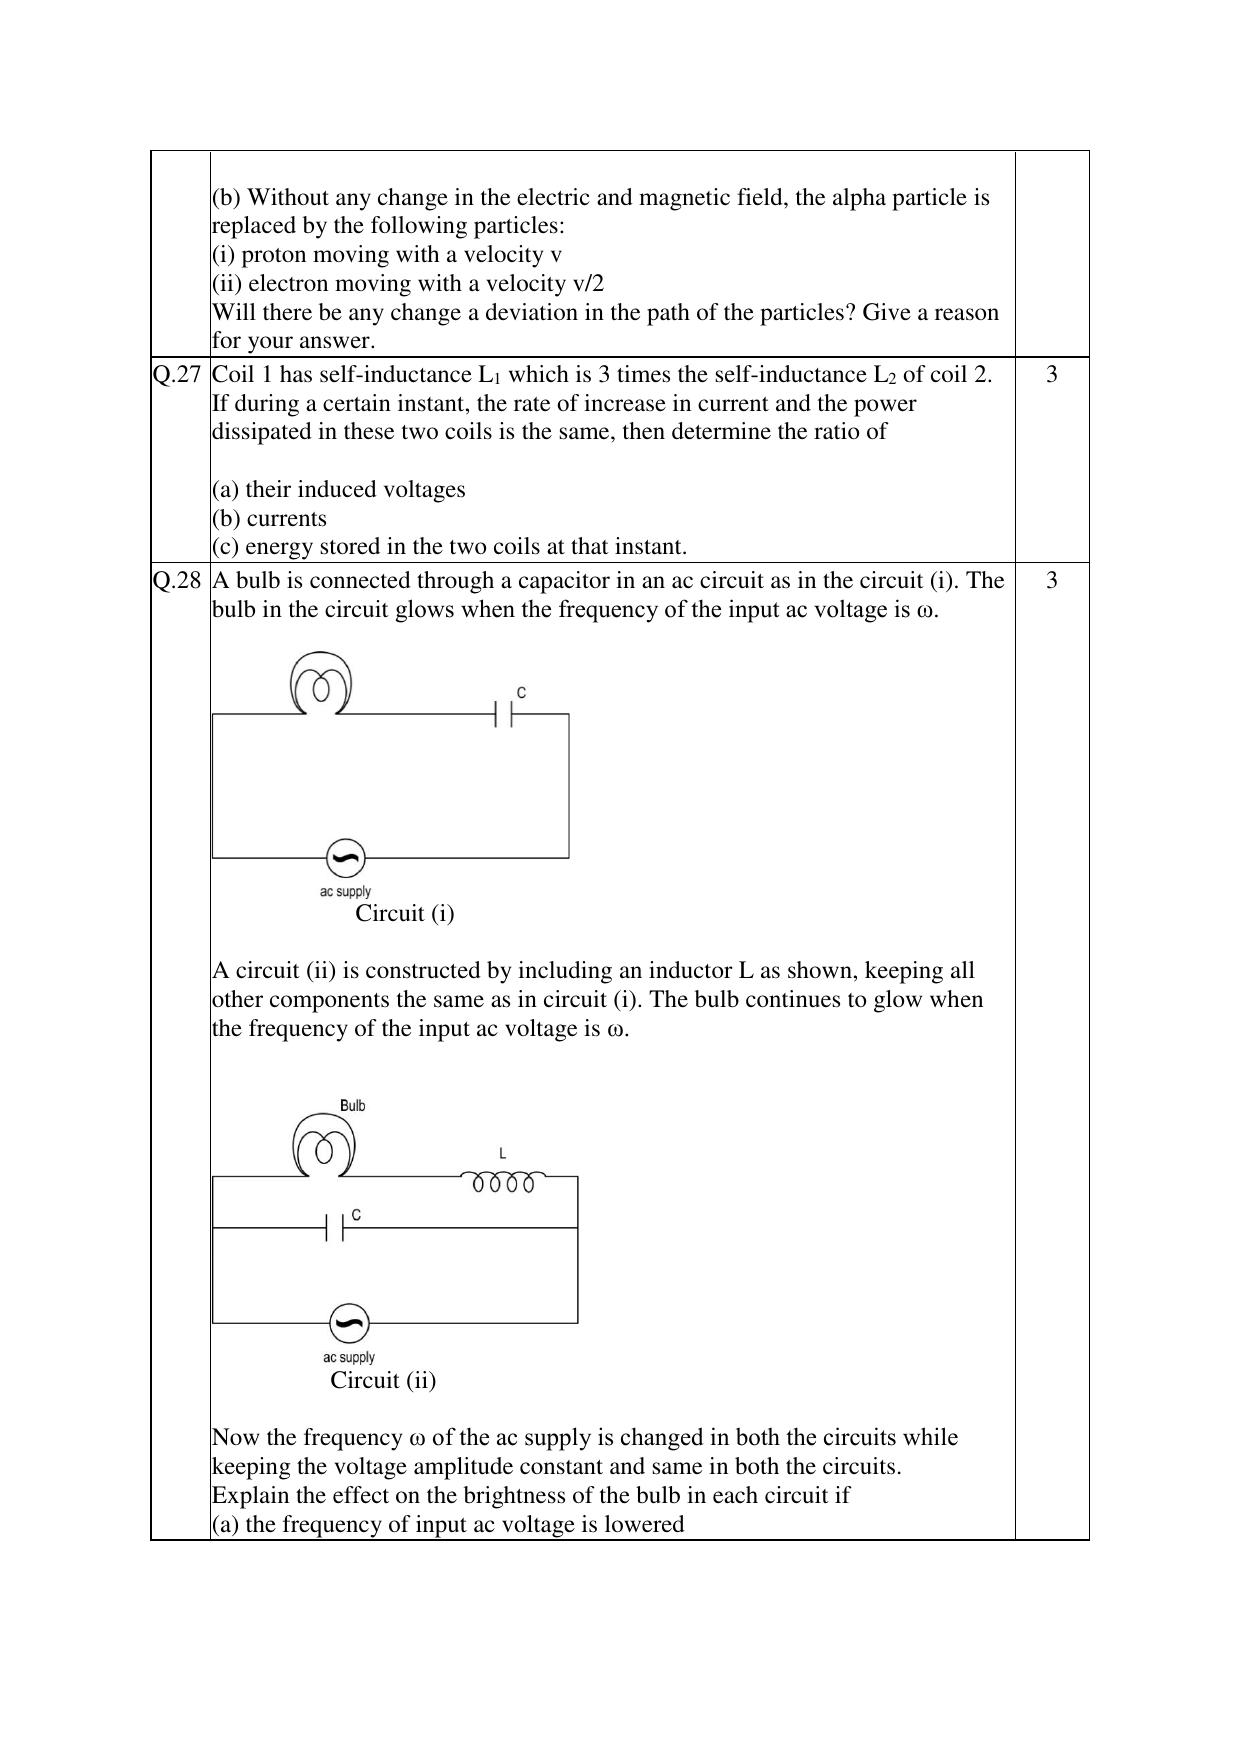 CBSE Class 12 Physics Practice Questions 2022-23 - Page 9